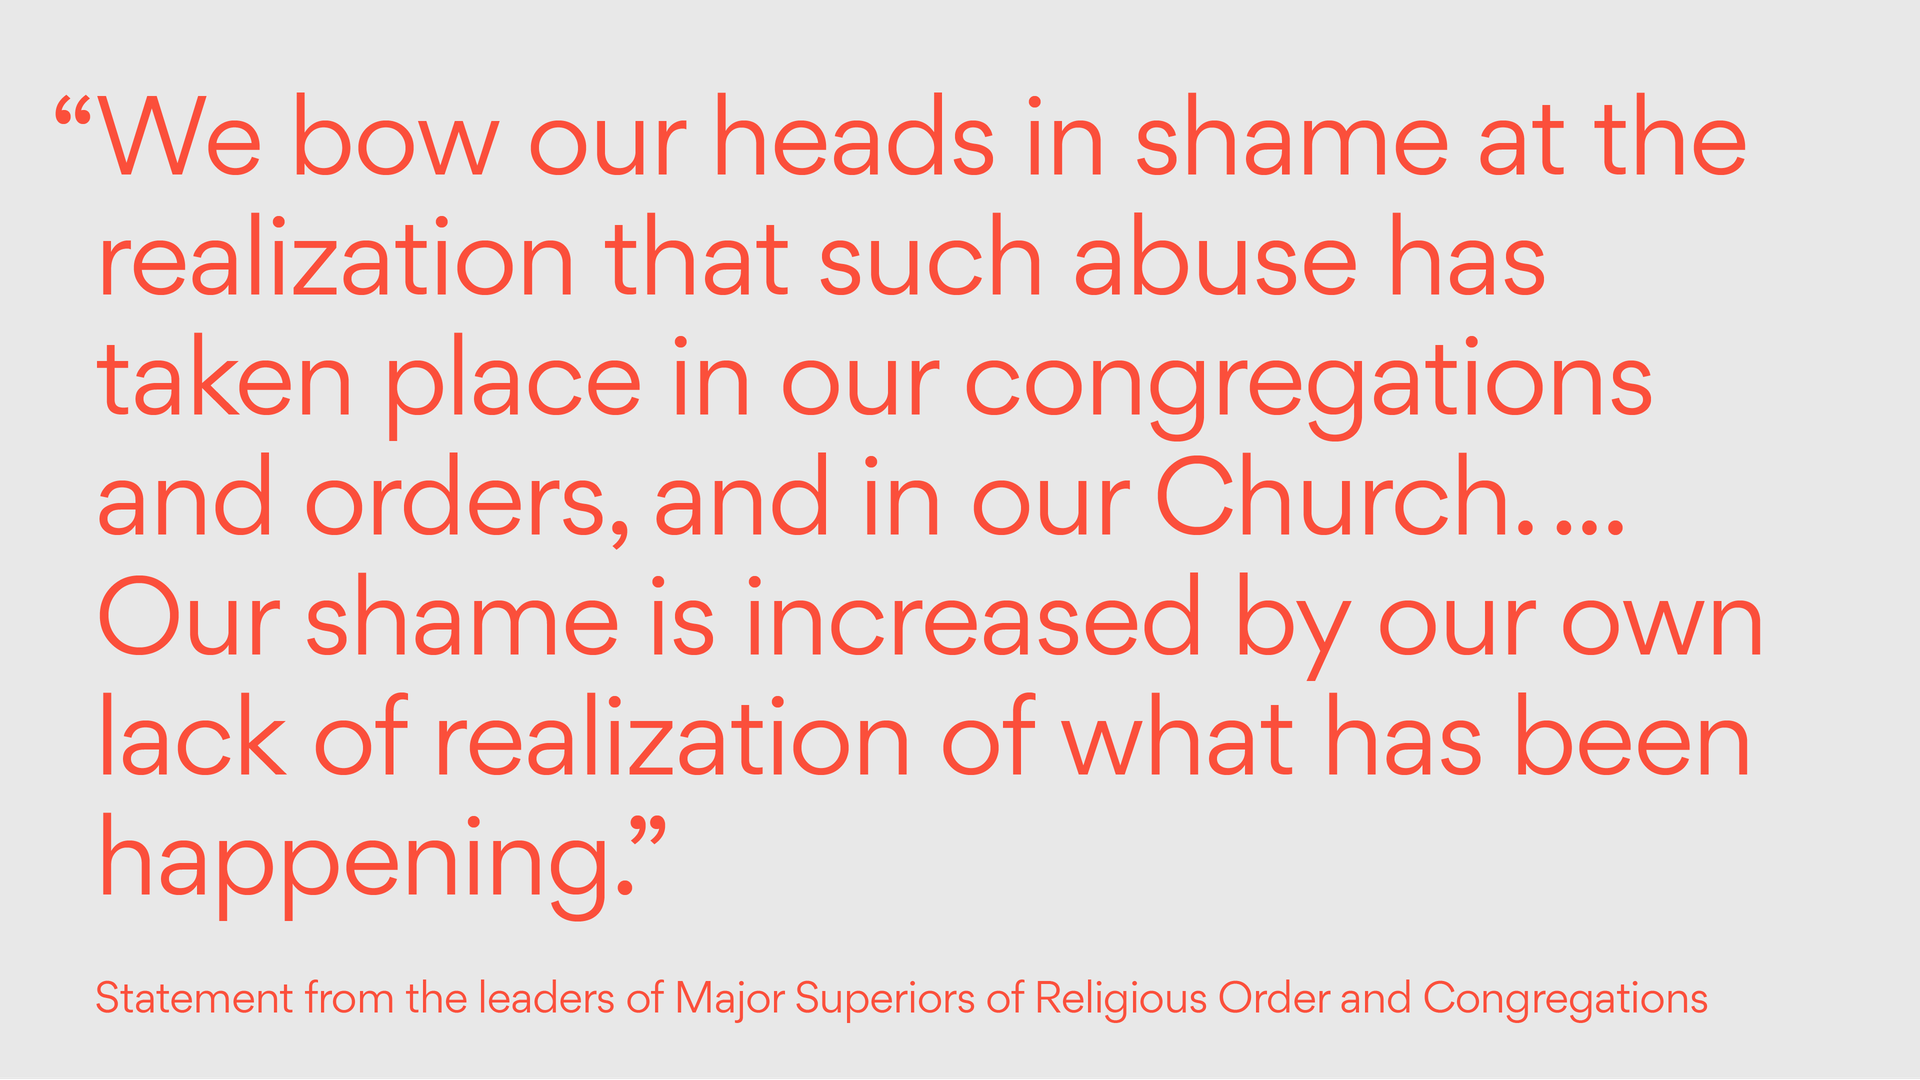 Statement from the leaders of Major Superiors of Religious Order and Congregations